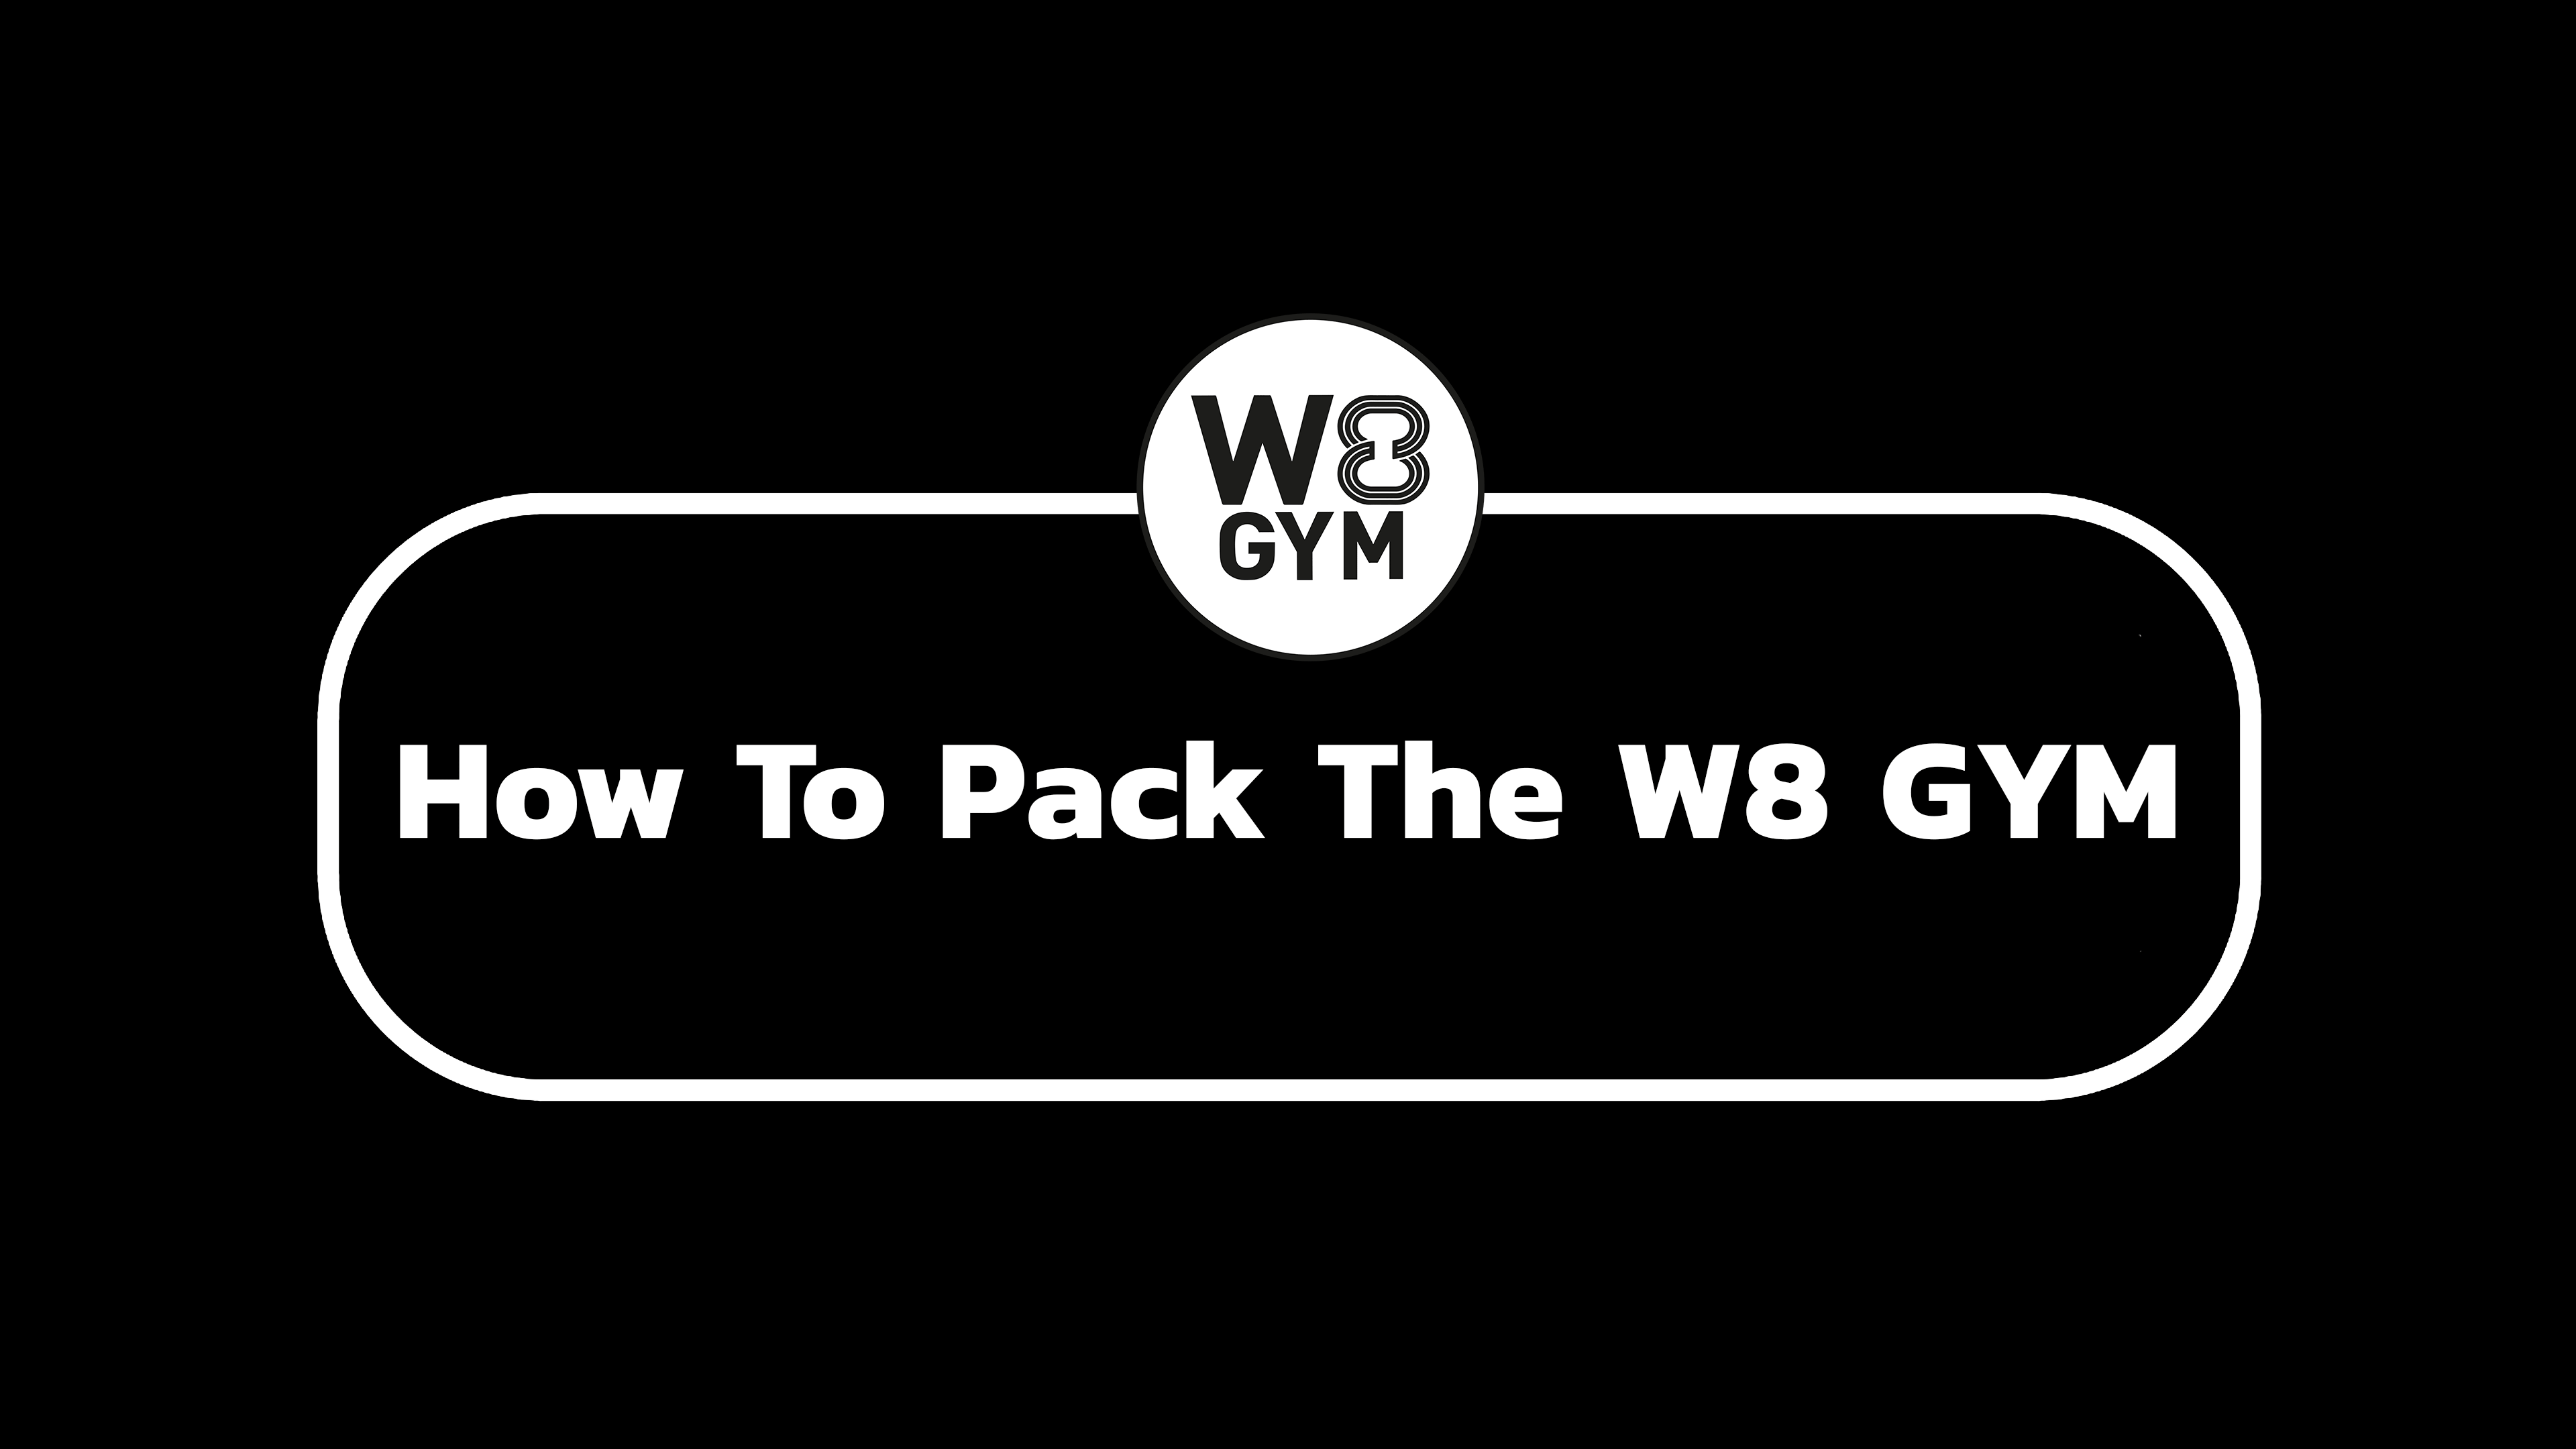 How To Pack The W8 GYM - W8 GYM